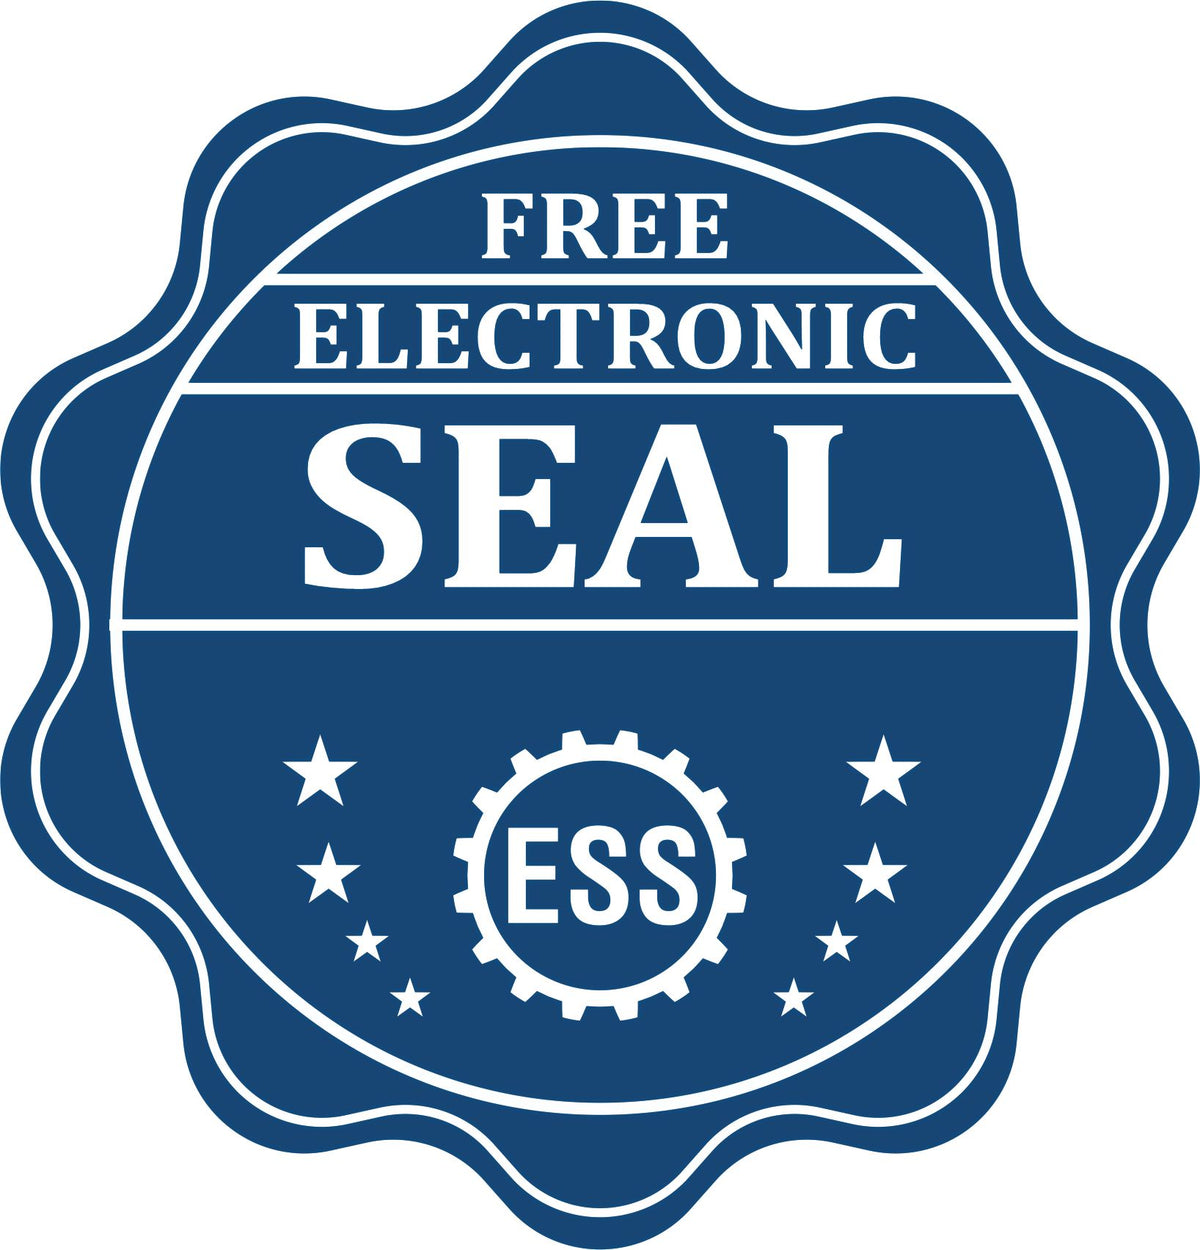 A badge showing a free electronic seal for the Gift Michigan Geologist Seal with stars and the ESS gear on the emblem.